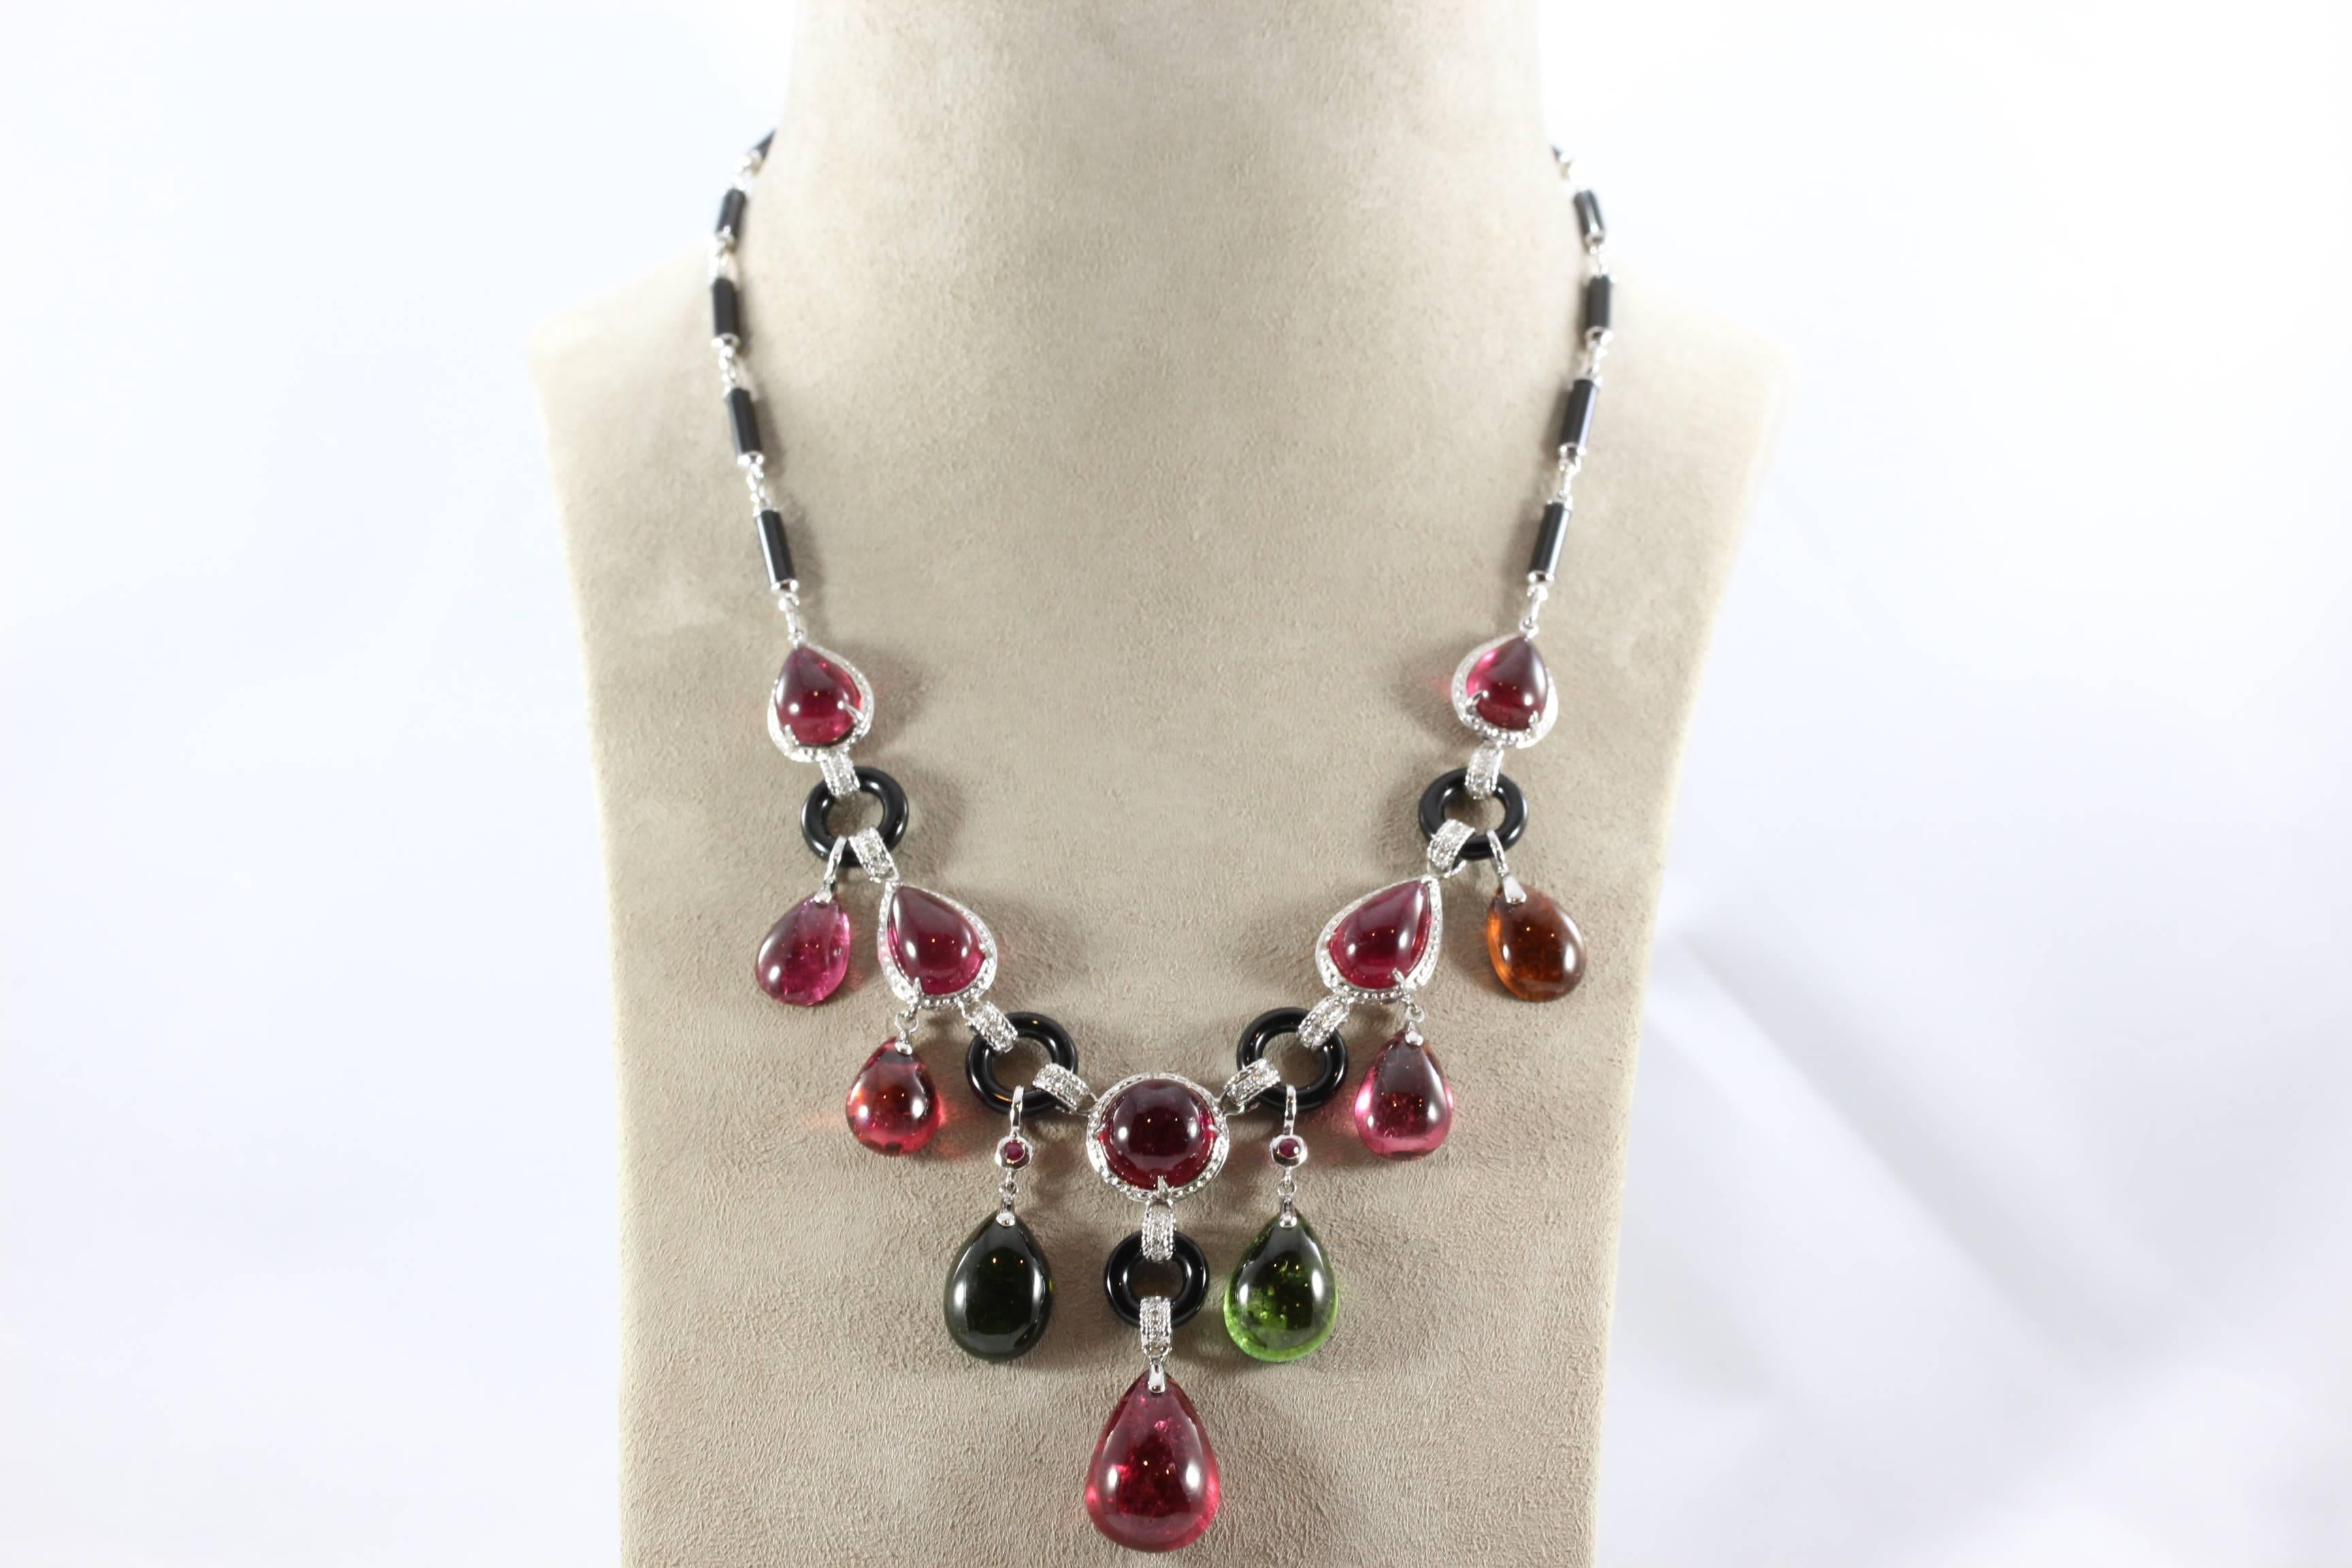 An impressive gem studded necklace featuring close to 40 carats of gem quality cabochon tourmaline. Studded with diamonds and designed with black onyx and 18K white gold, this necklace is for the bold looking to make a statement!  

Necklace Length: